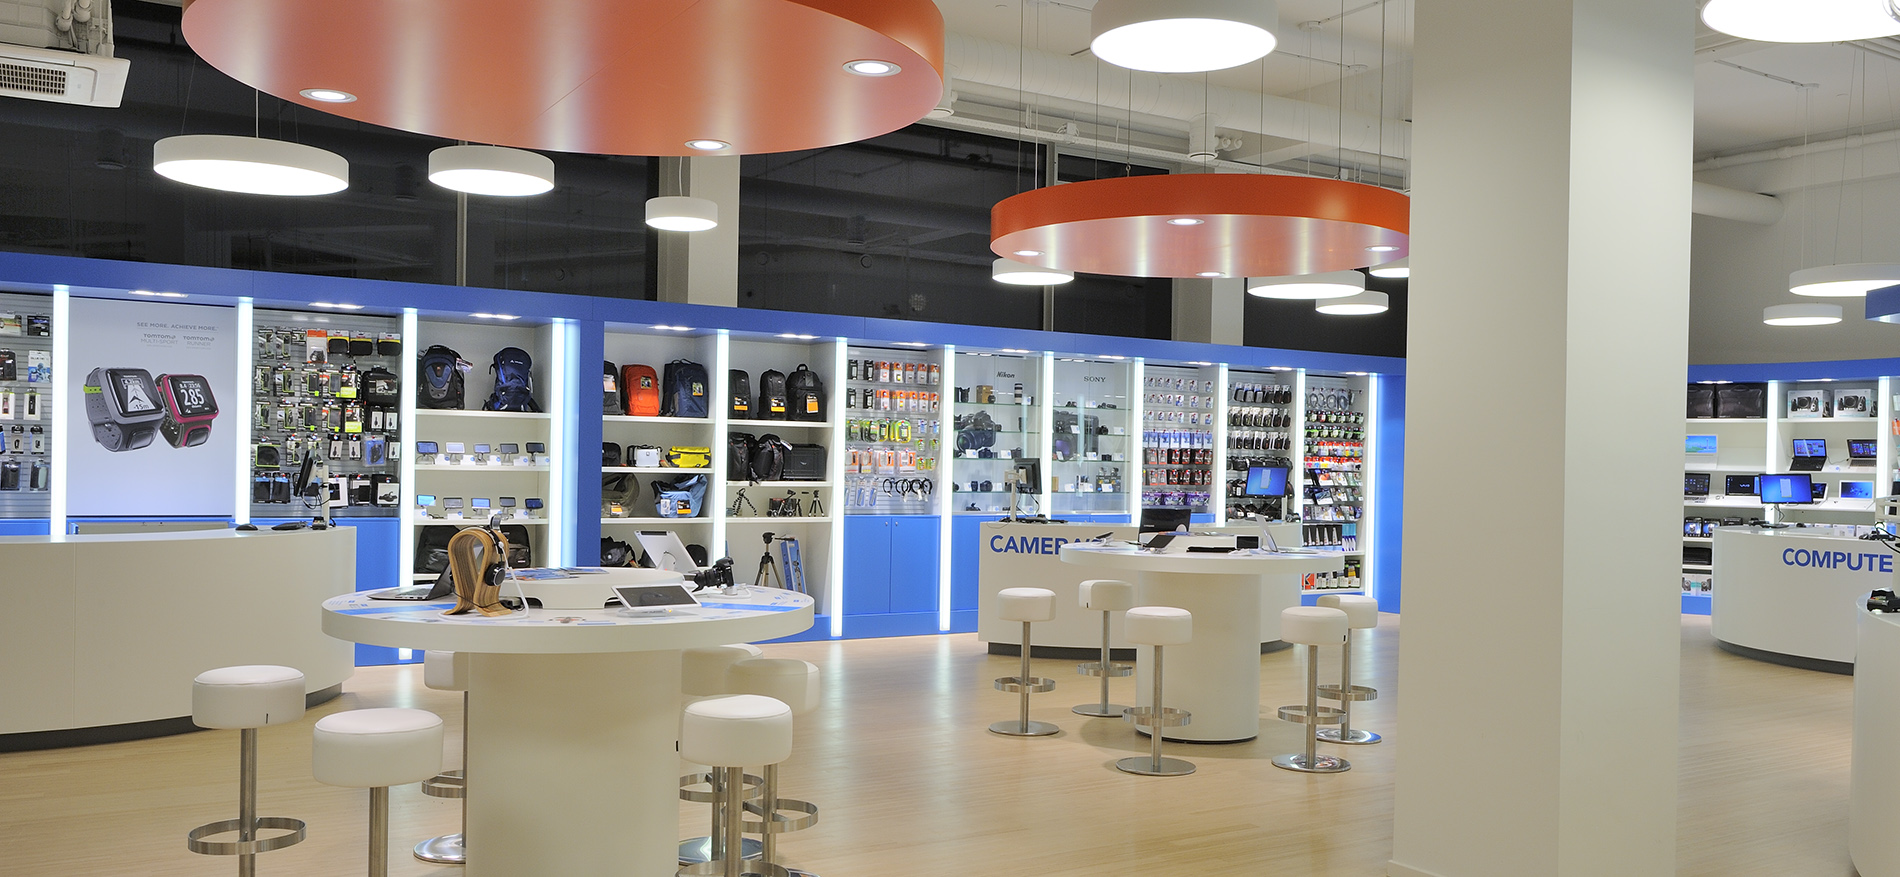 Interior Coolblue Electronics Rotterdam - Retail chains